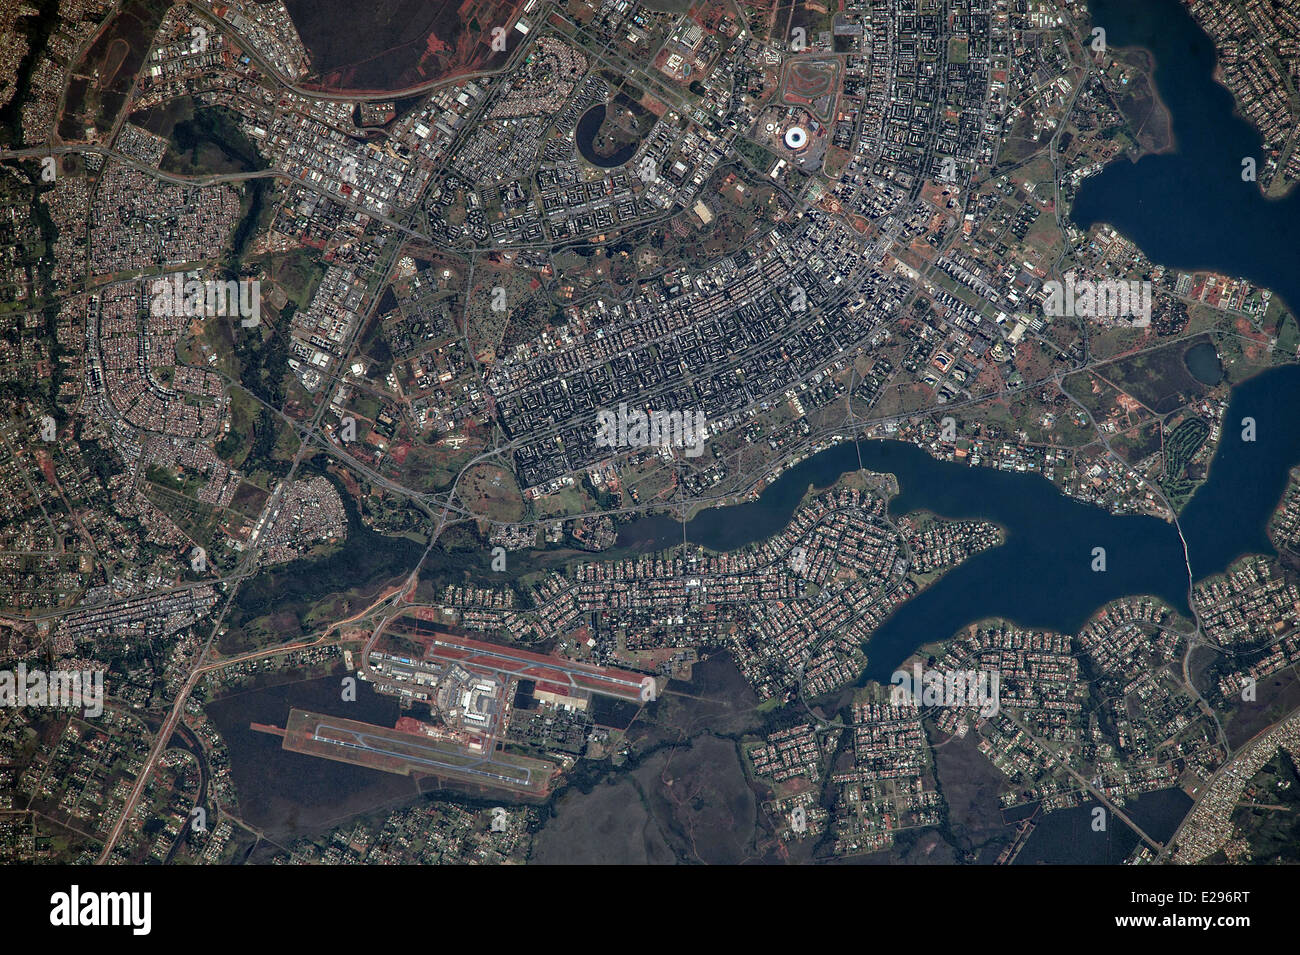 View from the International Space Station of the Brasilia World Cup Stadium (top center) May 28, 2014 in Brasilla, Brazil. The new roof appears as a brilliant white ring in this image. The stadium is one of Brasilia's largest buildings. Renovation began in 2010 and it is now the second most expensive stadium in the world, after Wembley Stadium in London, UK. Brasilia's international airport can be seen lower left on the far side of Lake Paranoa. Brasilia is widely known for its modern building designs and city layout. Stock Photo